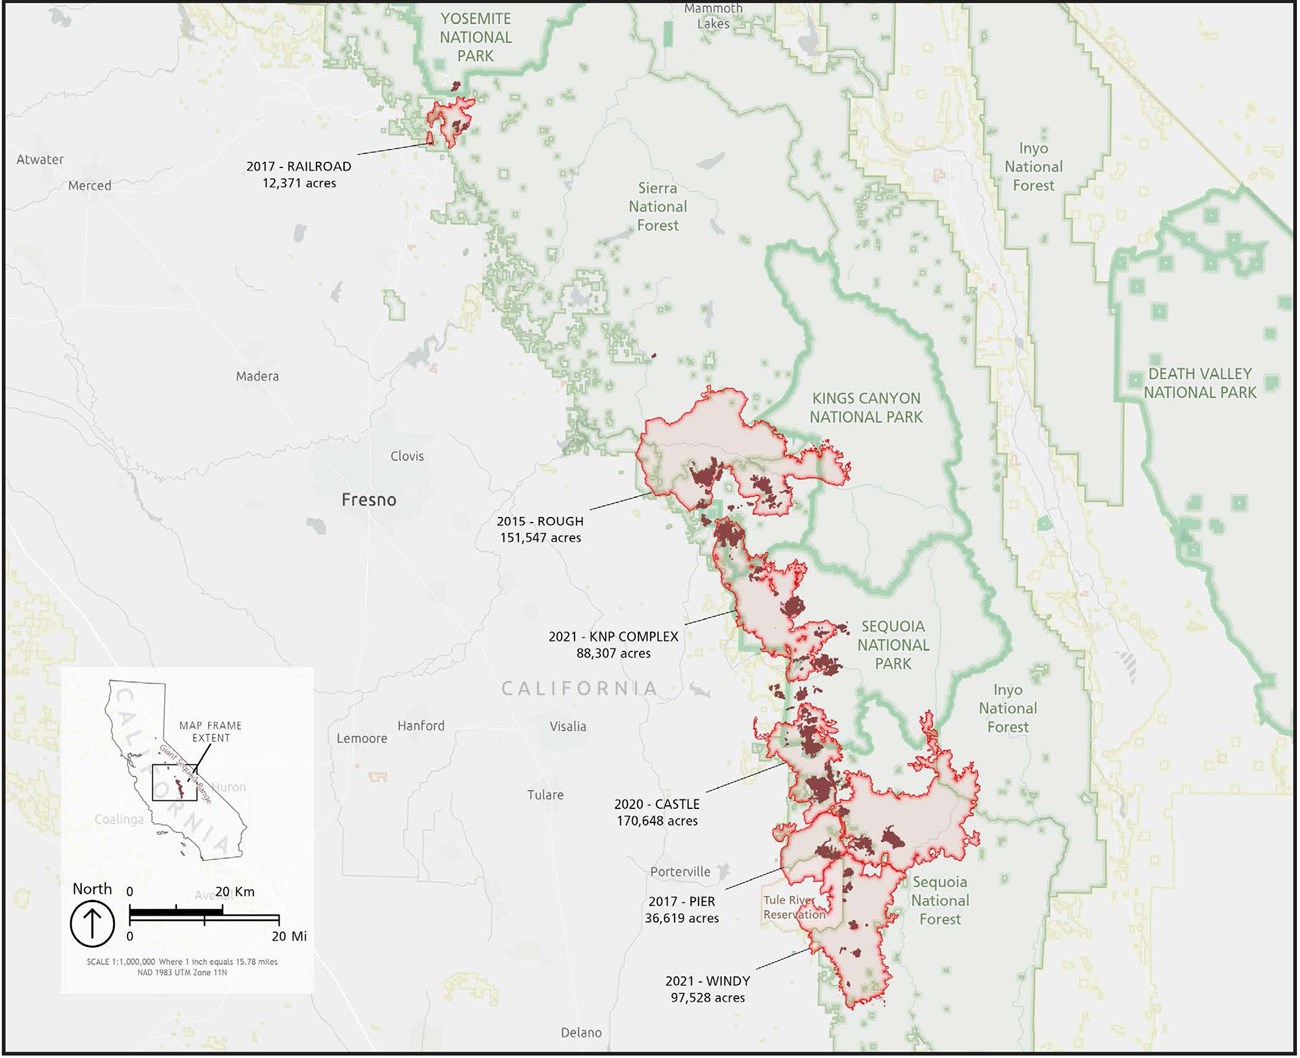 Map highlights six Sierra Nevada wildfires and sequoia groves affected, 2015-2021. National park, national forest, and other organizaitonal boundaries are also shown.